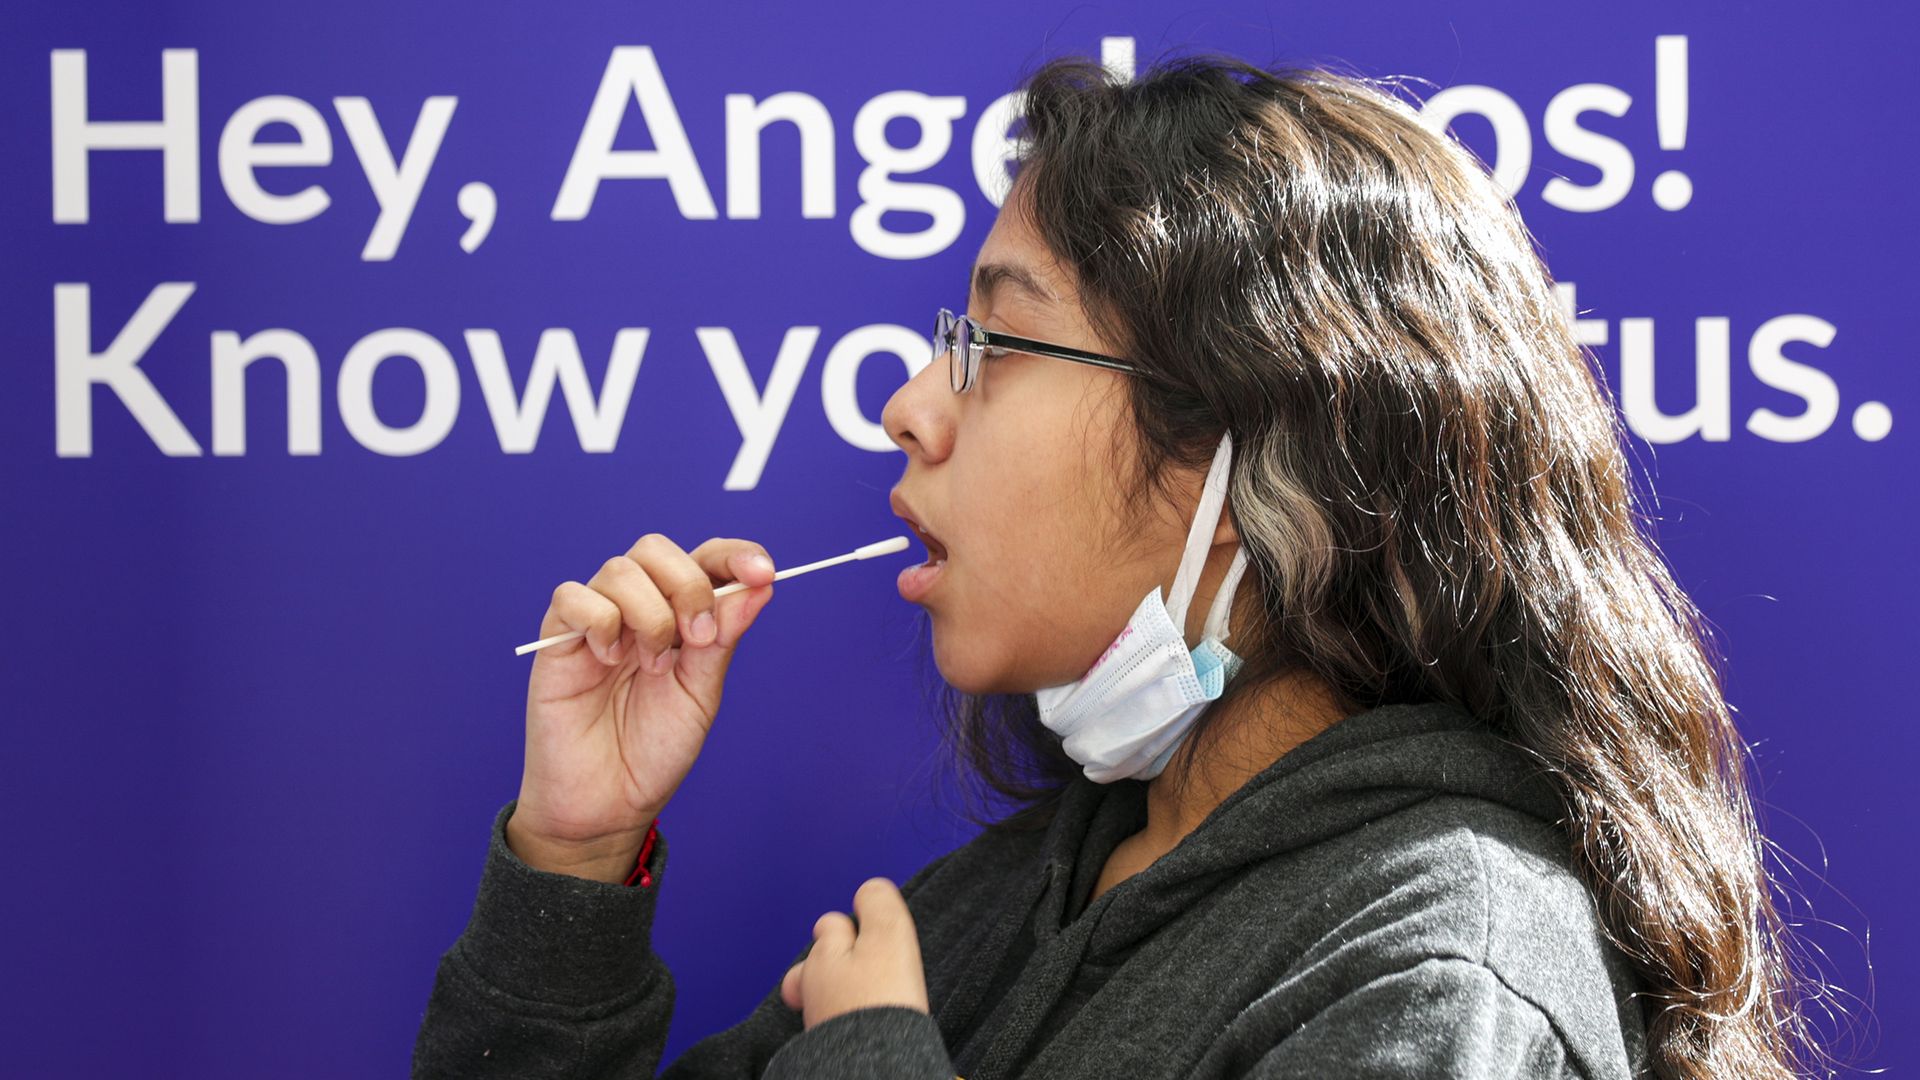 Laura Robles, 14, left, takes a self-administered oral swab COVID-19 test at Union Station site on Wednesday, Nov. 11, 2020 in Los Angeles